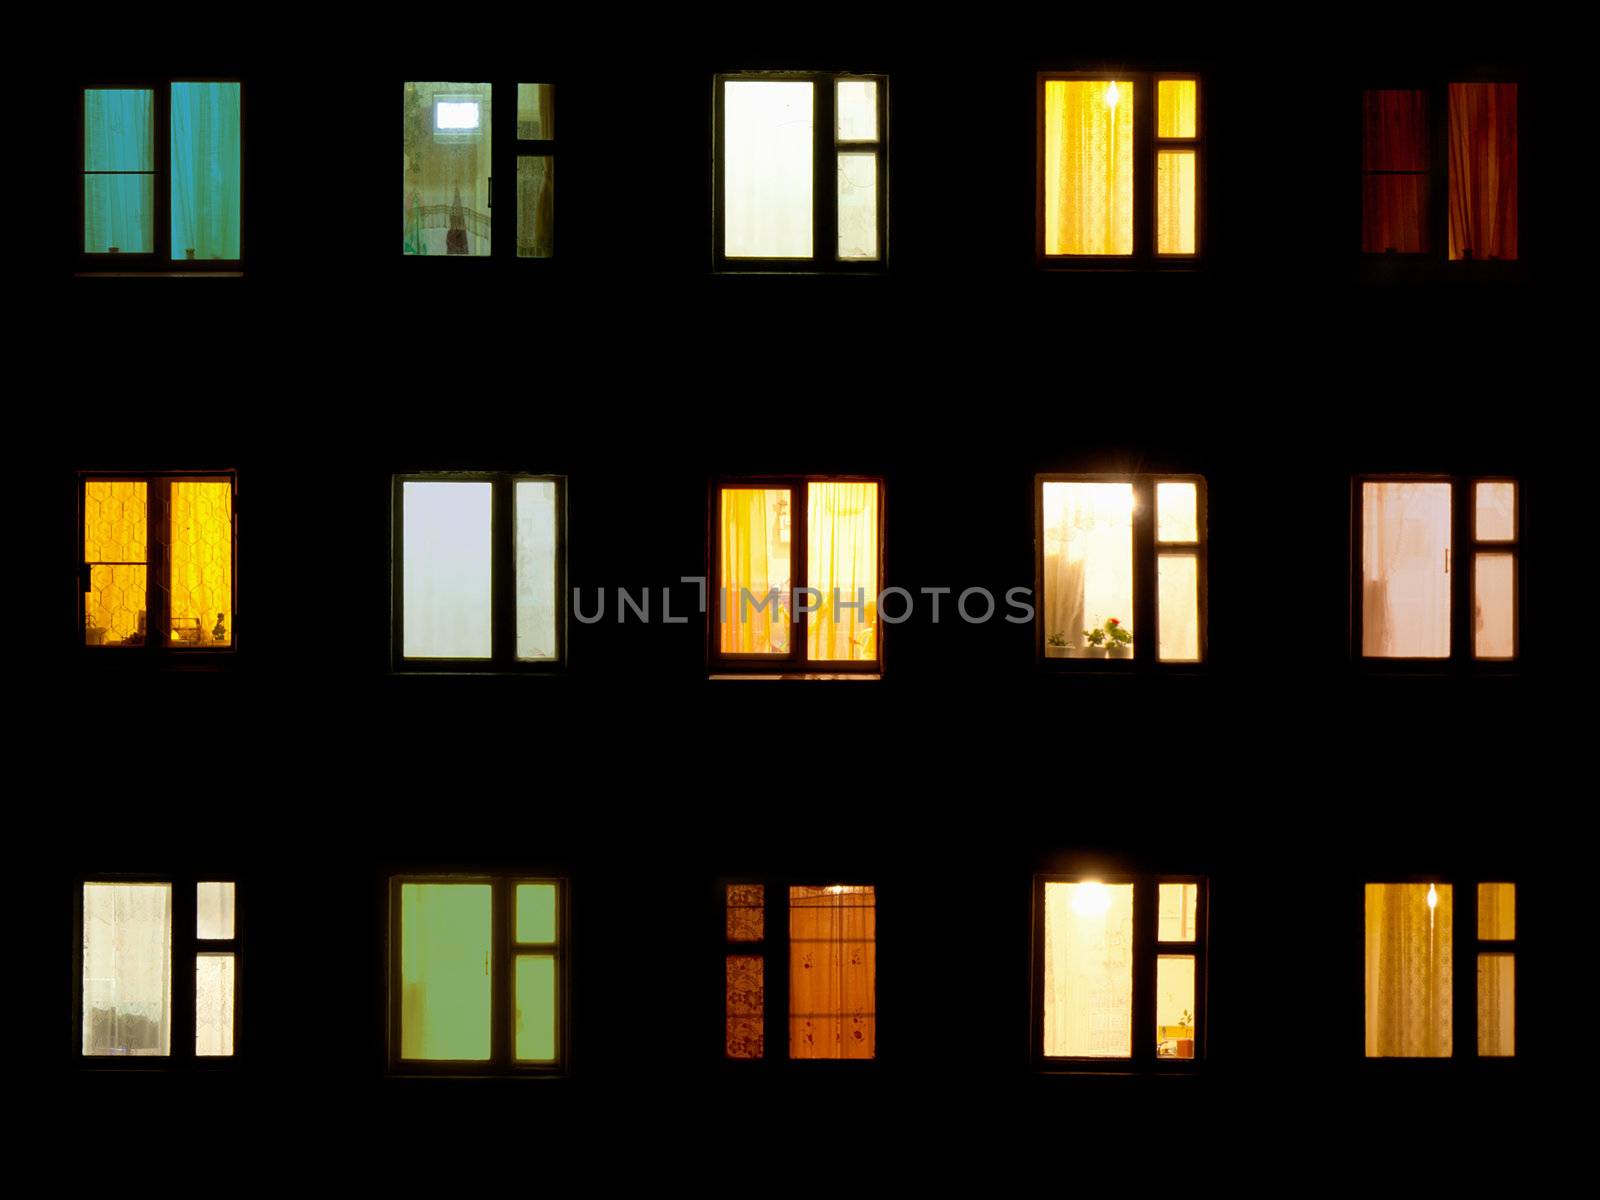 Night windows - block of flats background by pzaxe